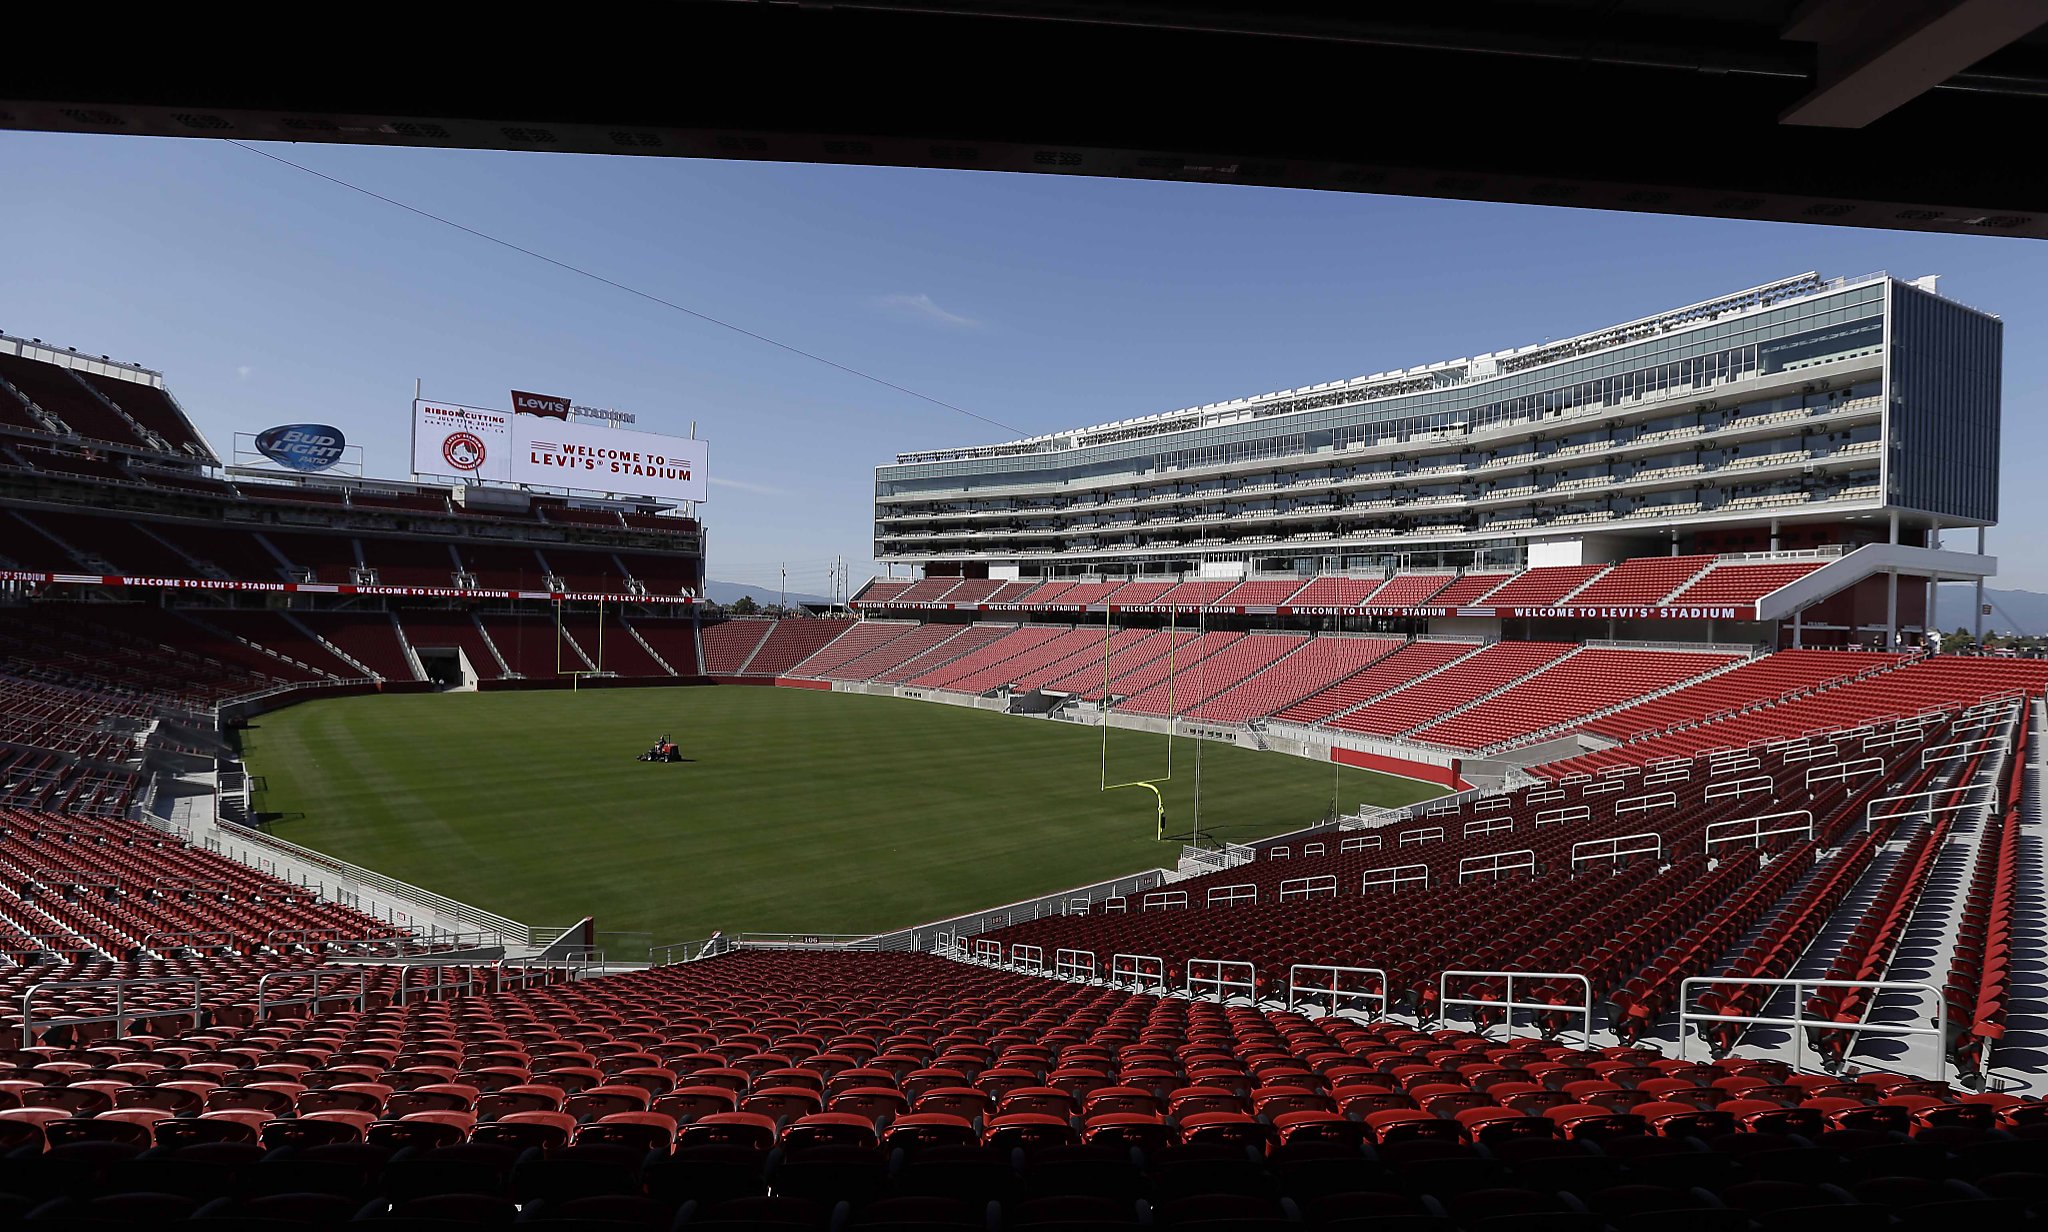 49ers face a bulked-up opponent in Levi's Stadium fight